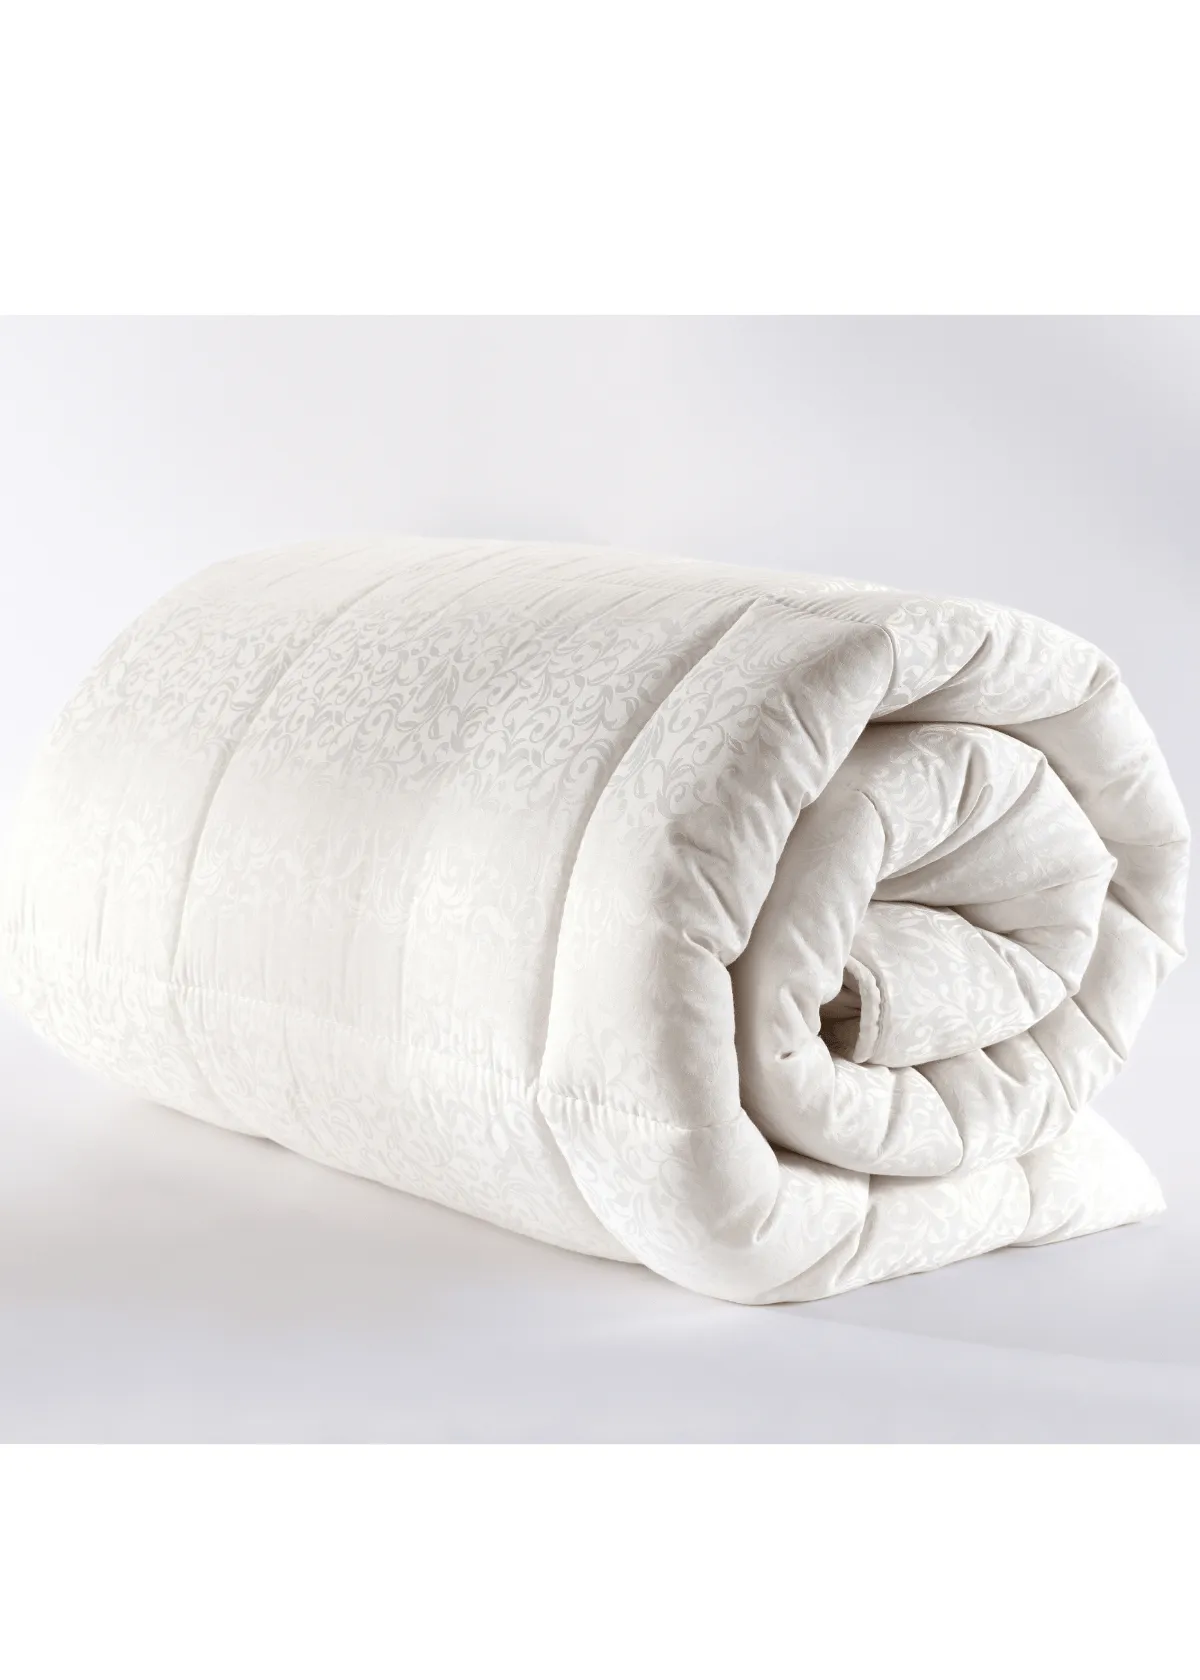 "Wool Mattress Topper | Our Top Picks For a Cozy Night’s Sleep"